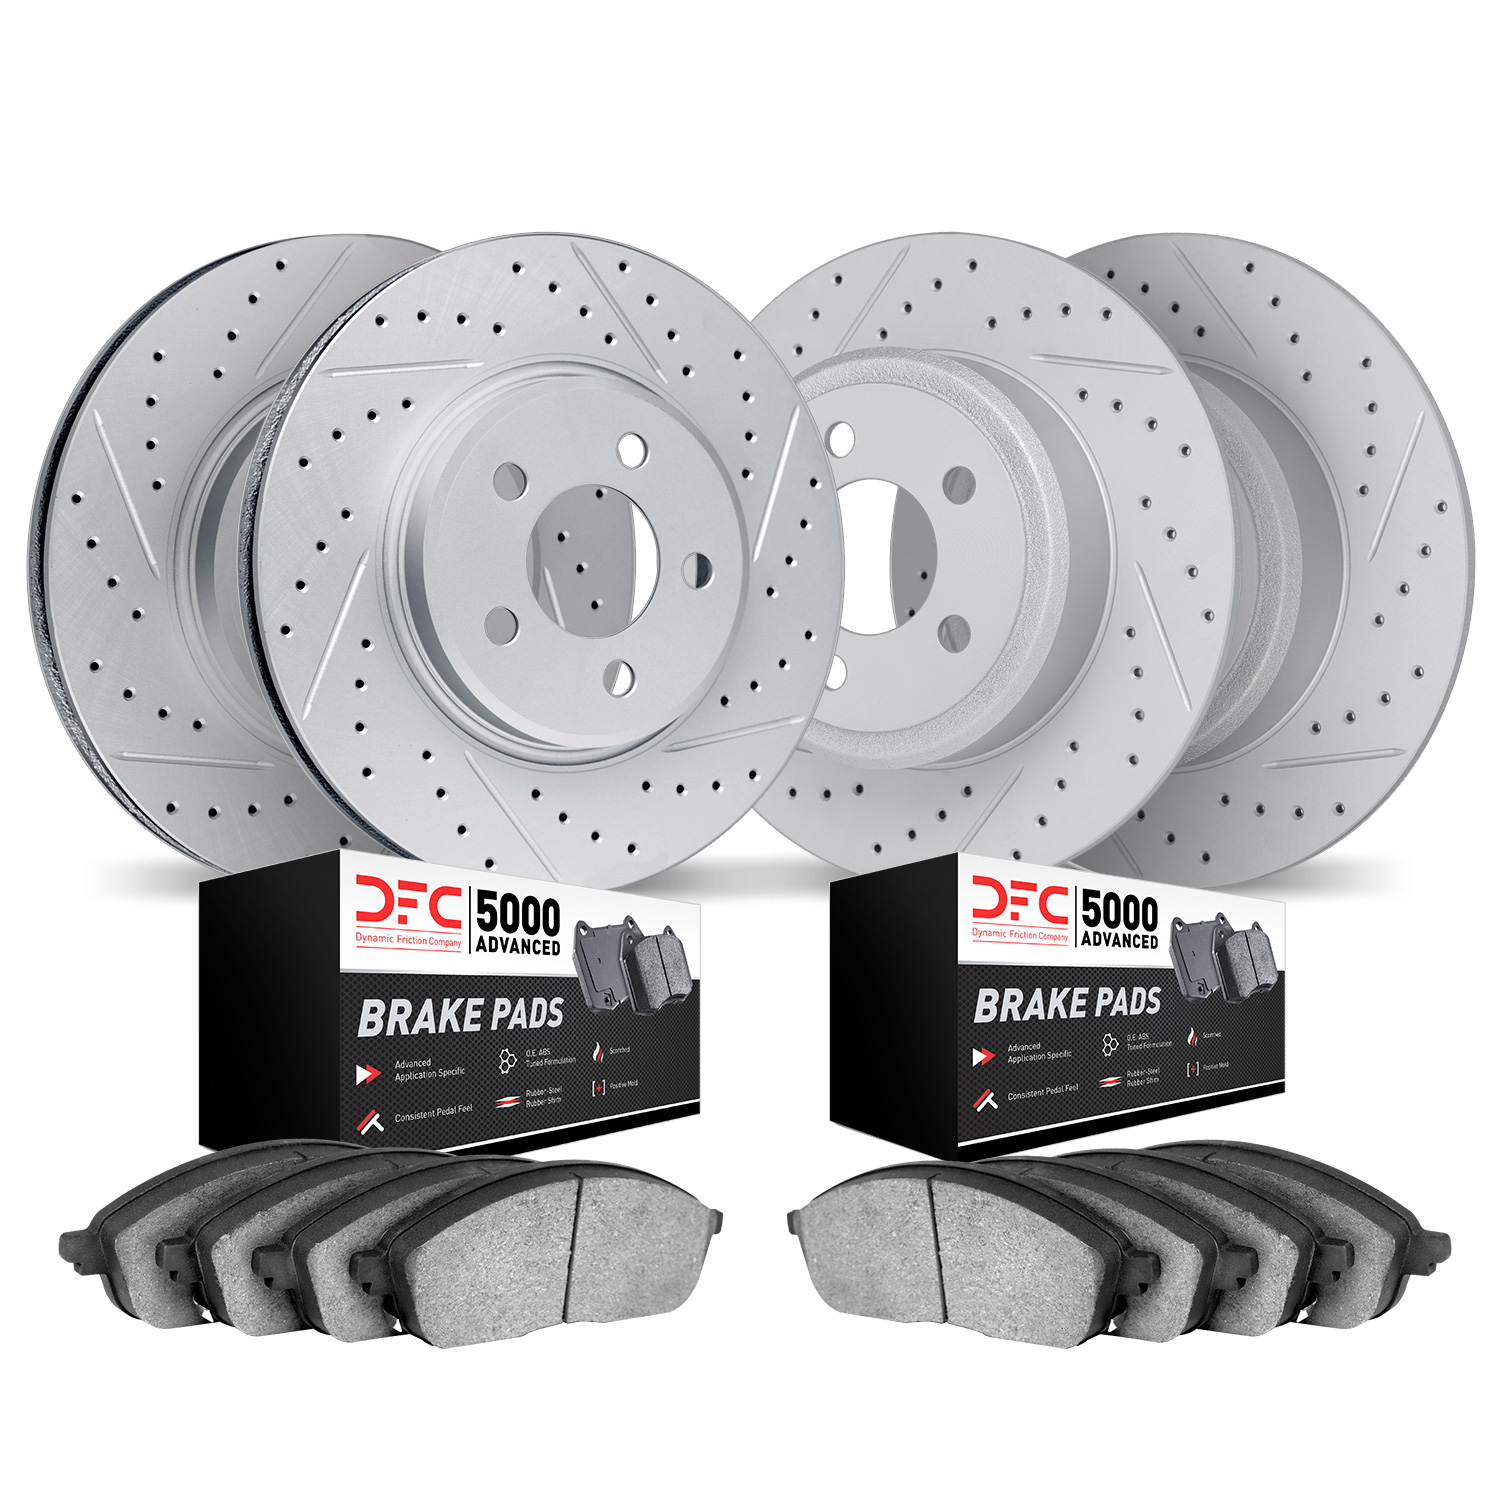 2504-54208 Geoperformance Drilled/Slotted Rotors w/5000 Advanced Brake Pads Kit, 2003-2005 Ford/Lincoln/Mercury/Mazda, Position: